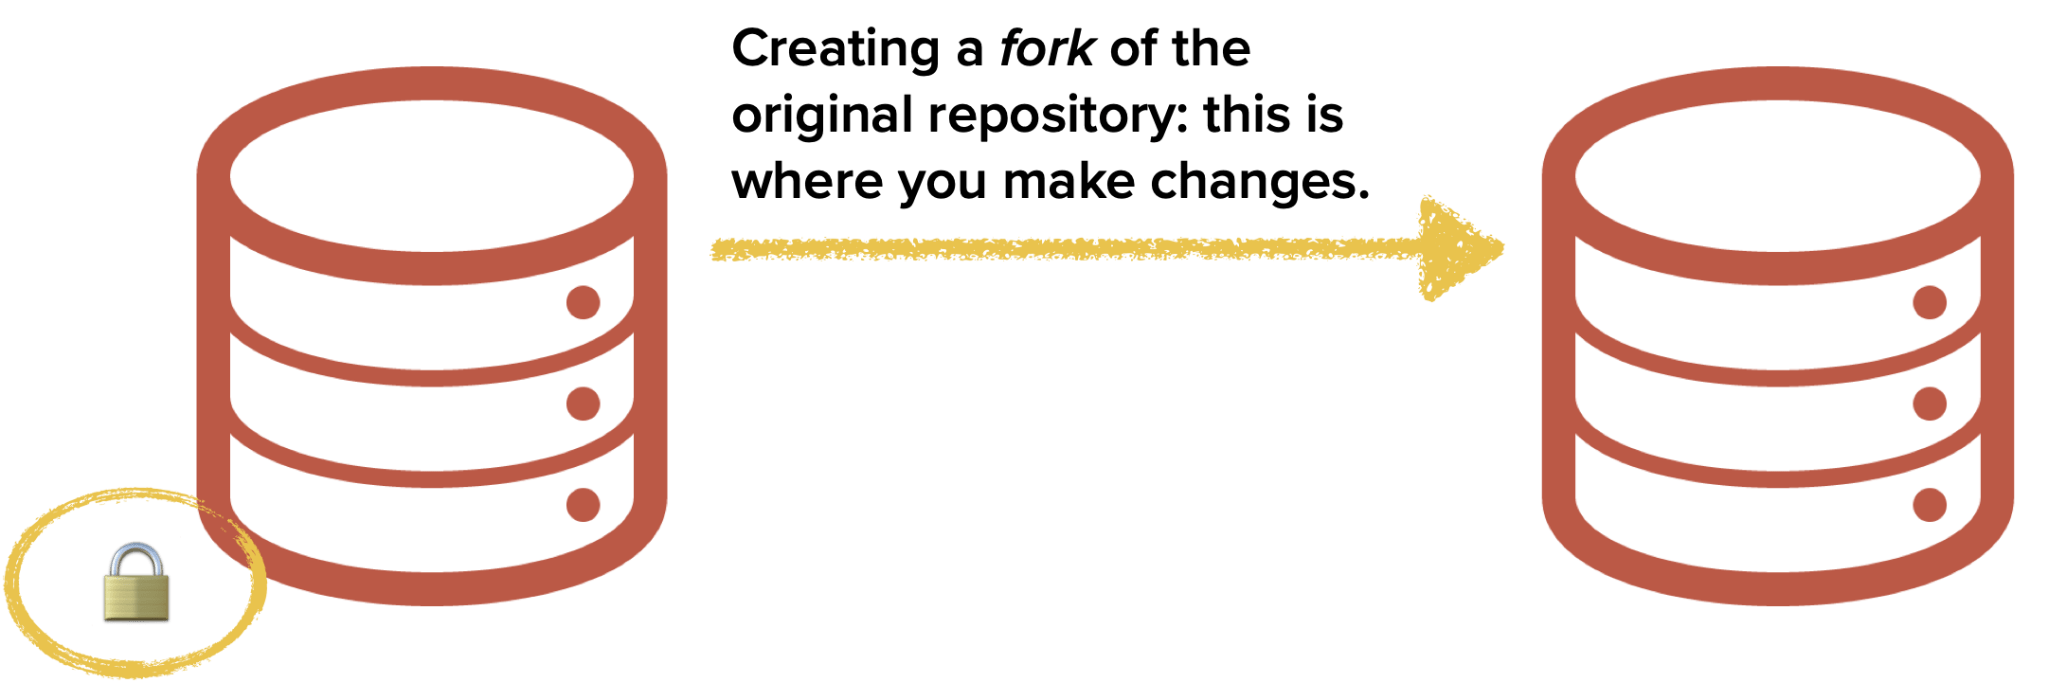 Creating a fork of the original respository is where you make changes.